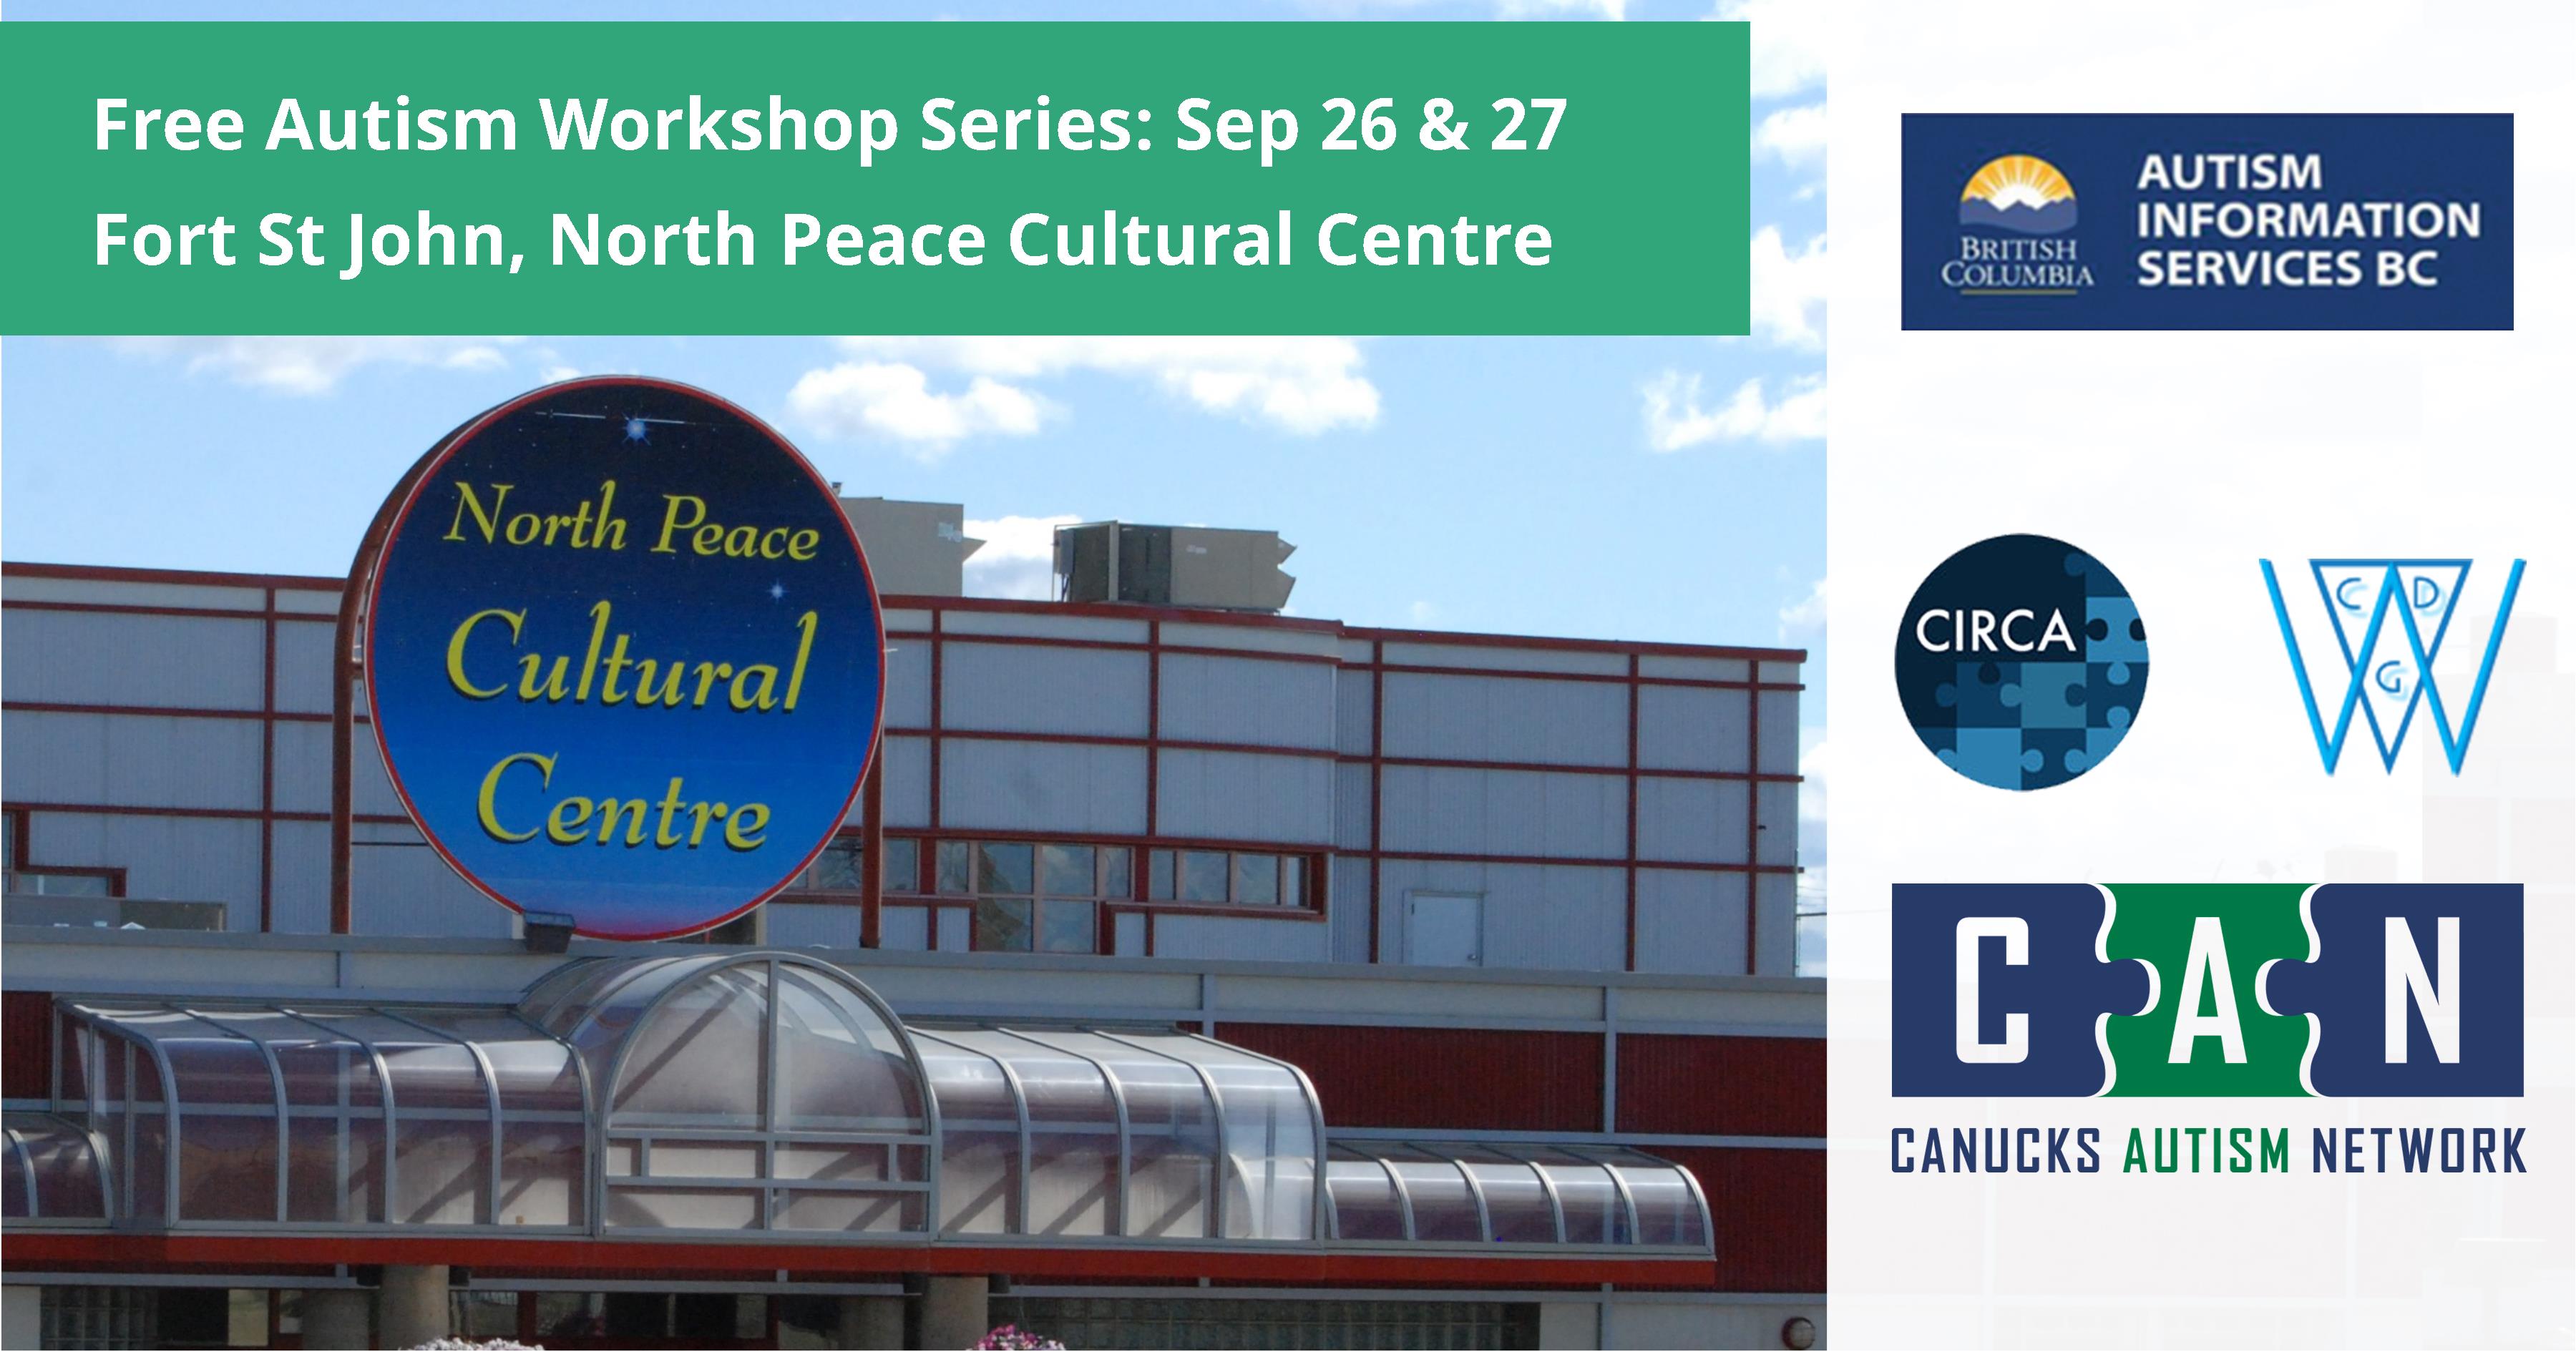 Fort St John autism workshop series on September 26 and 27 at North Peace Cultural Centre